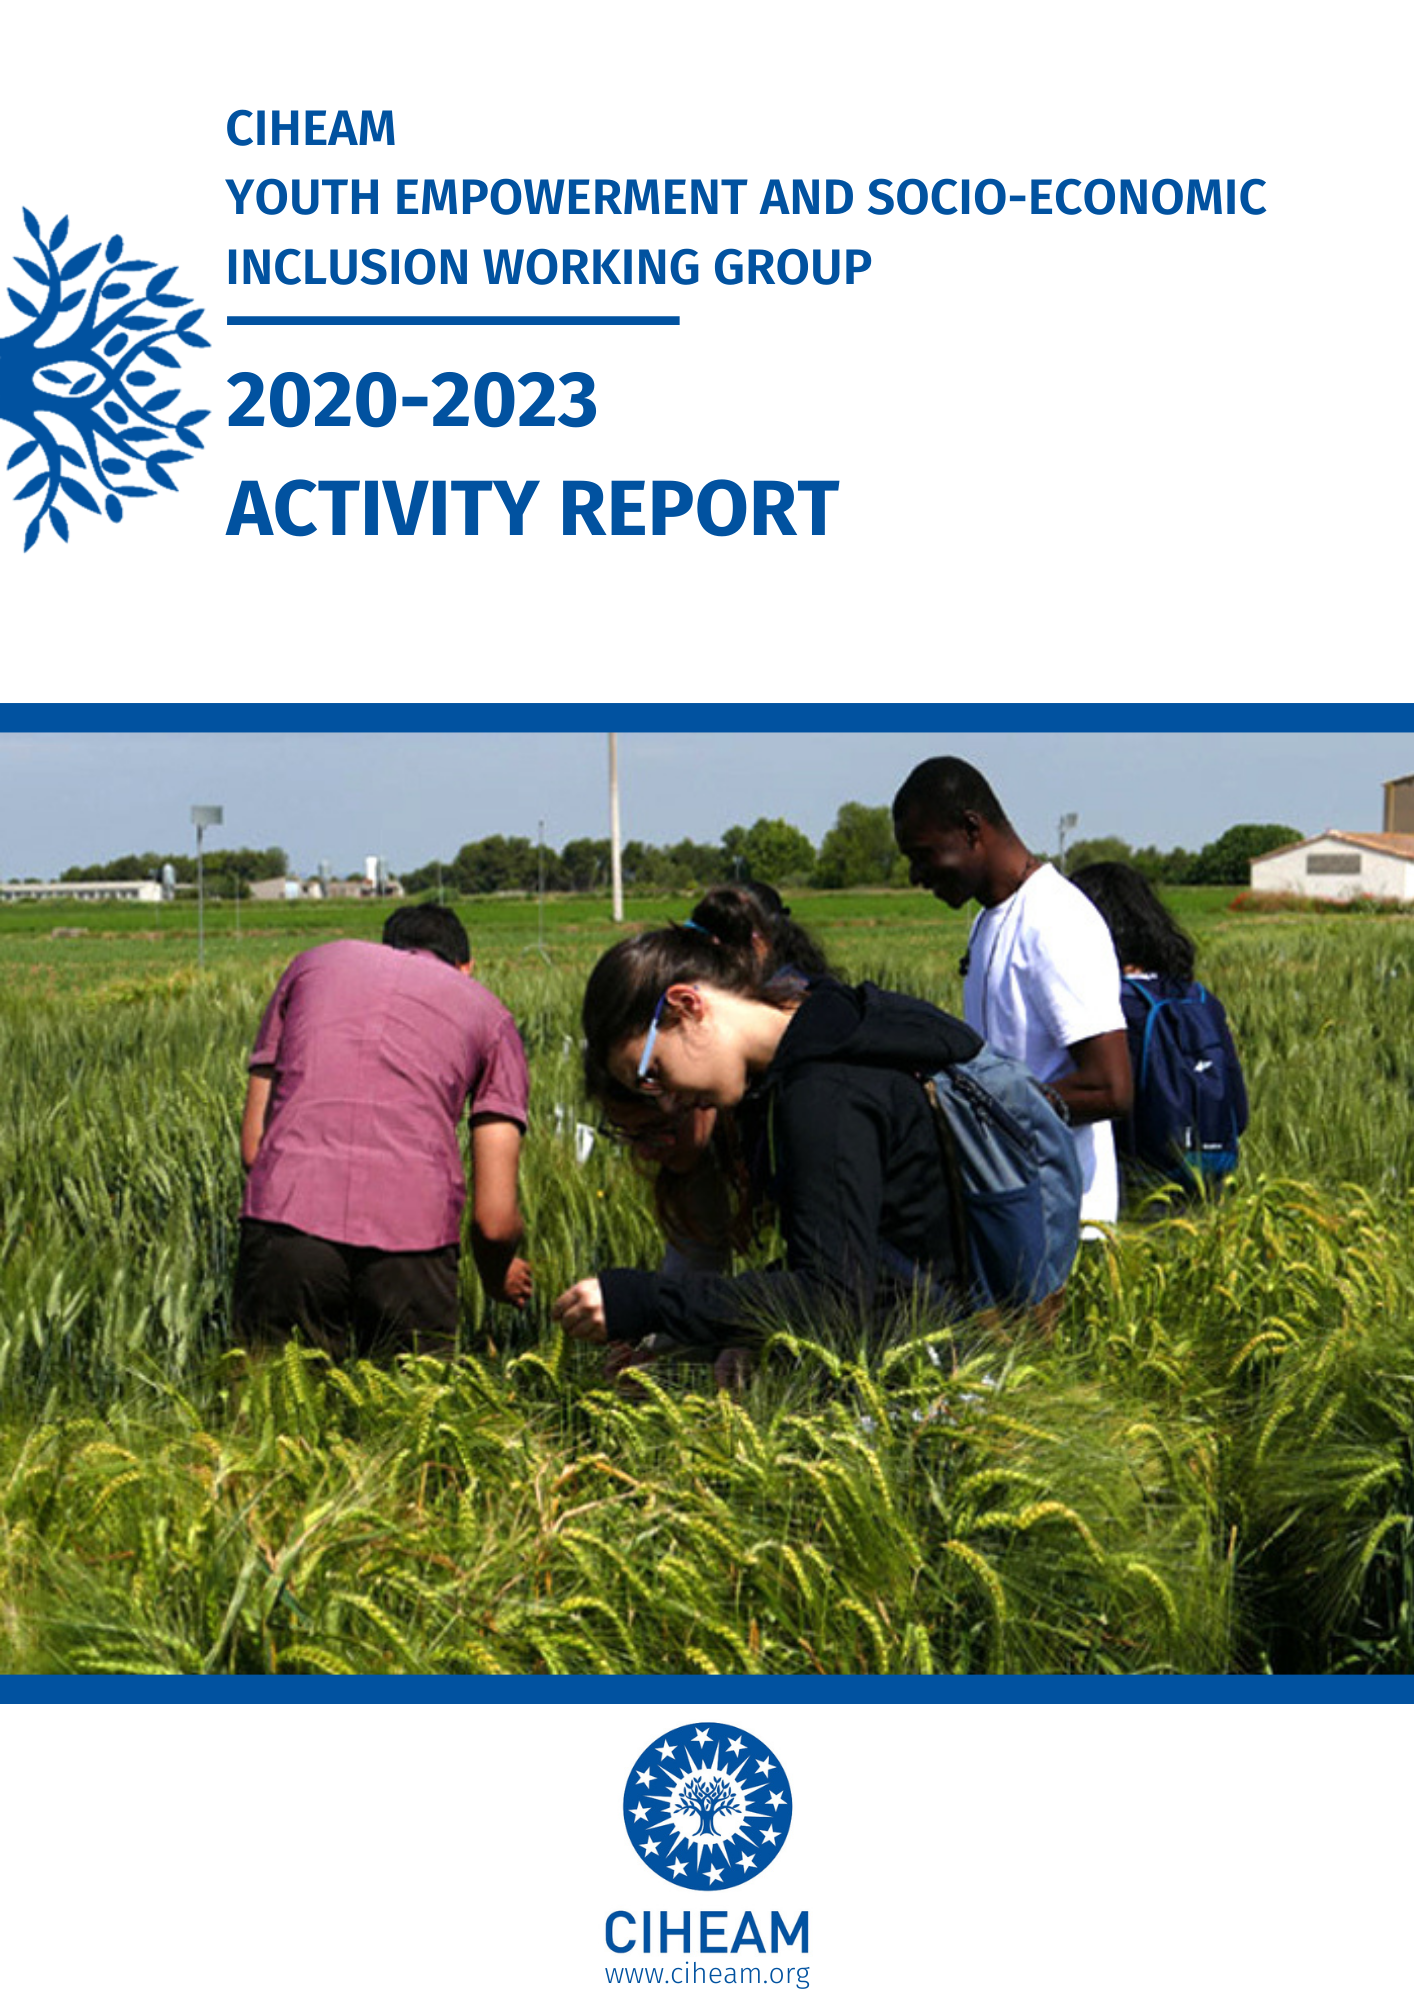 Activity Report on Youth Empowerment and Socio-economic Inclusion